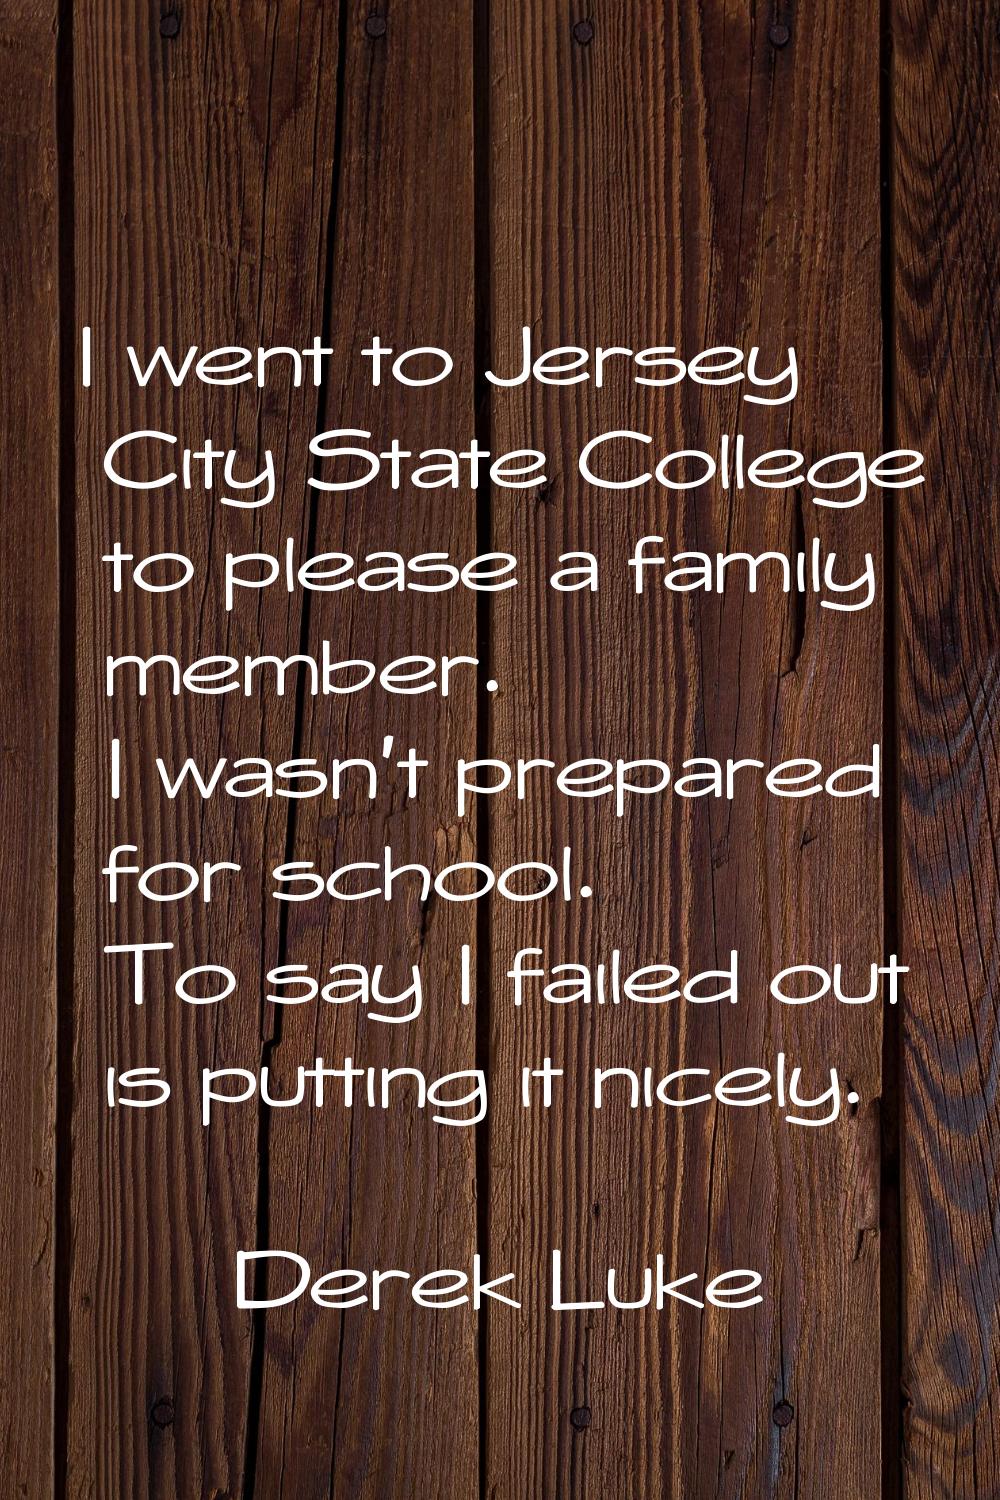 I went to Jersey City State College to please a family member. I wasn't prepared for school. To say